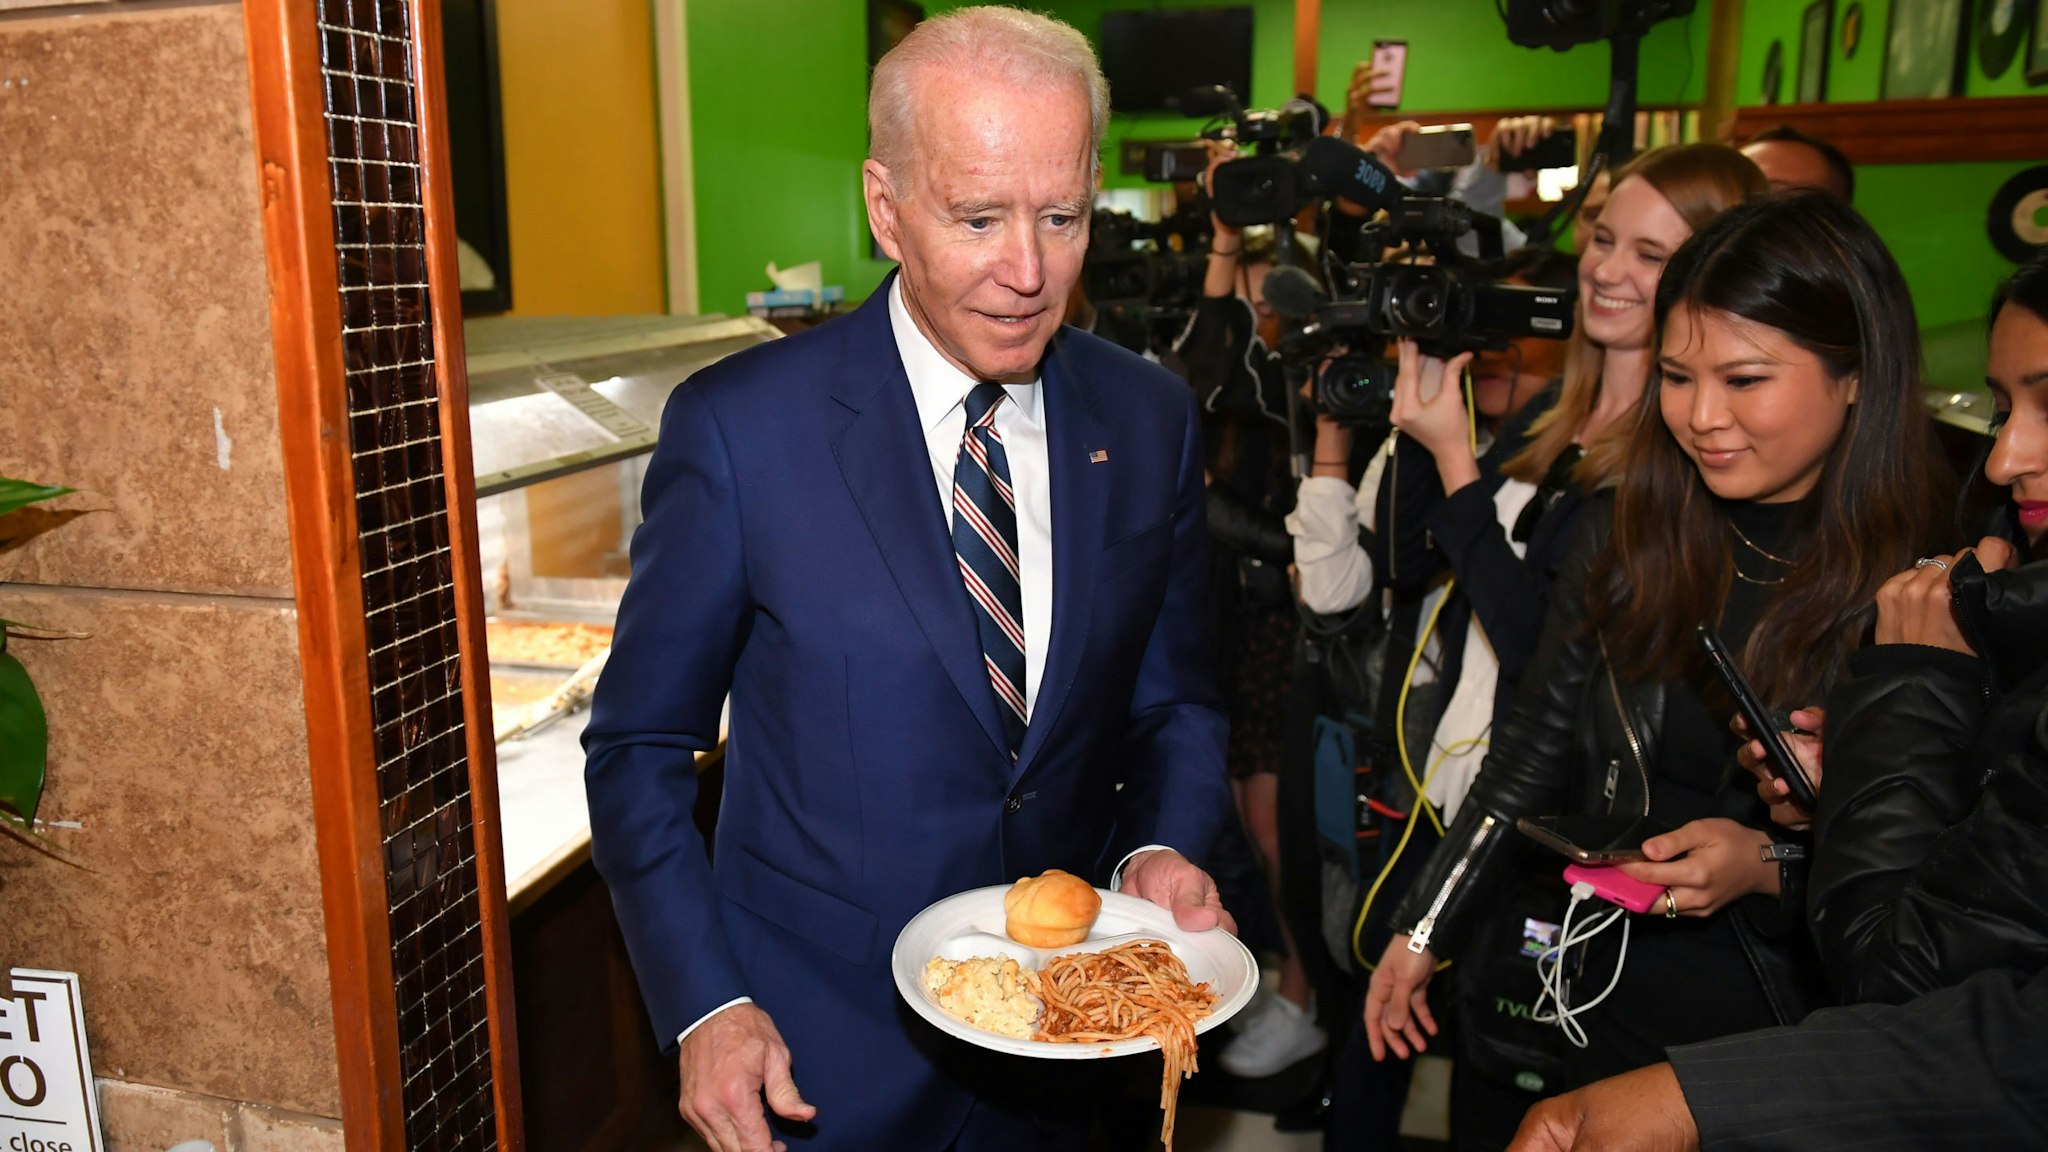 Democratic presidential candidate Joe Biden picks up some lunch at Pearl's Southern Cooking restaurant in Jackson, Mississippi on March 8, 2020.